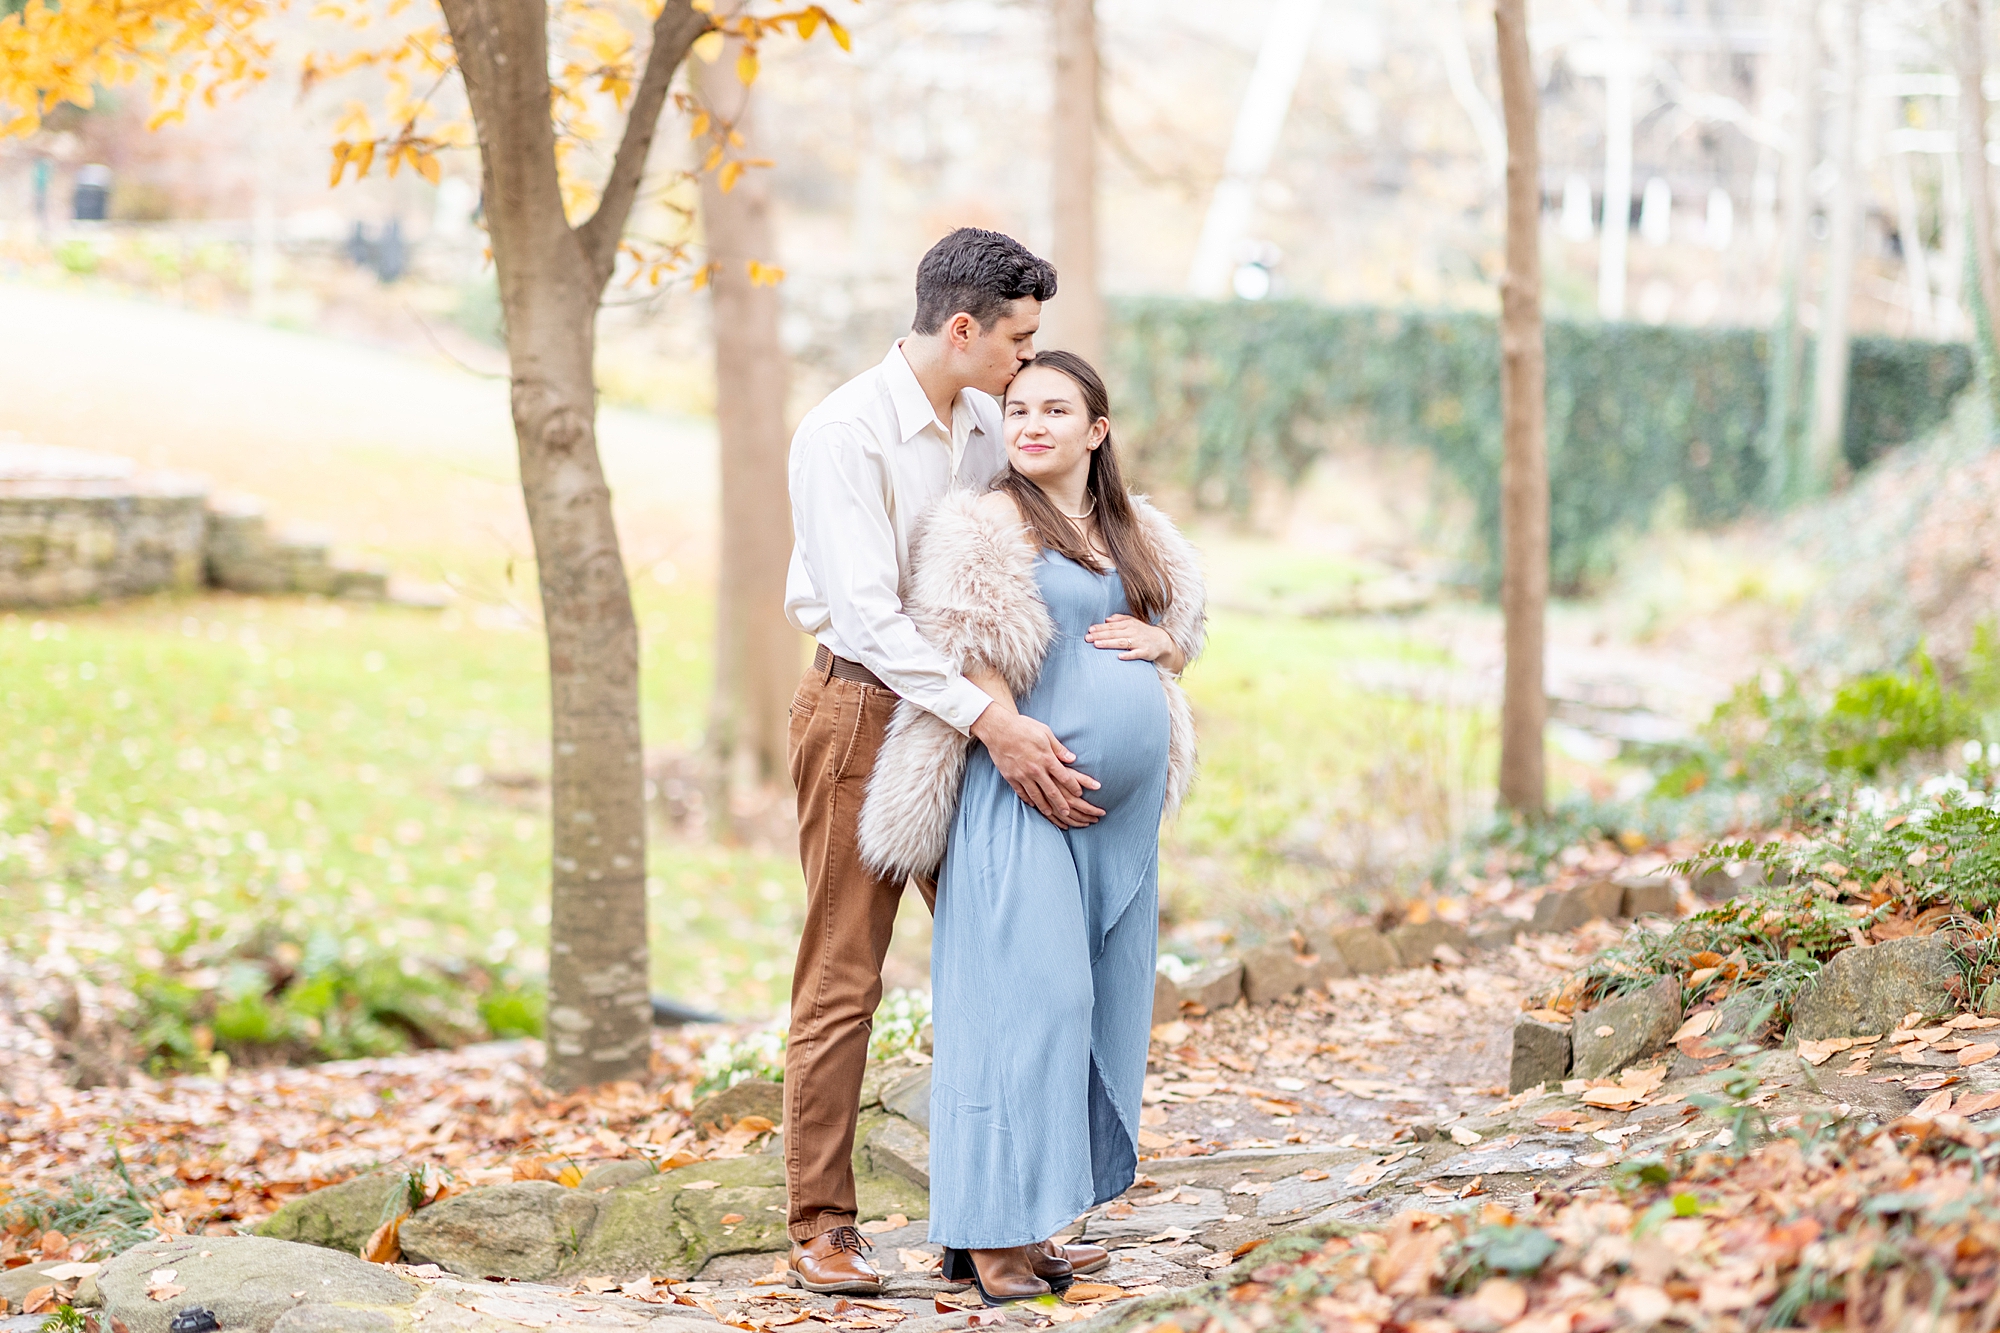 Downtown Greenville Maternity Session photographed by SC photographer, Sarah Claire Portraiture